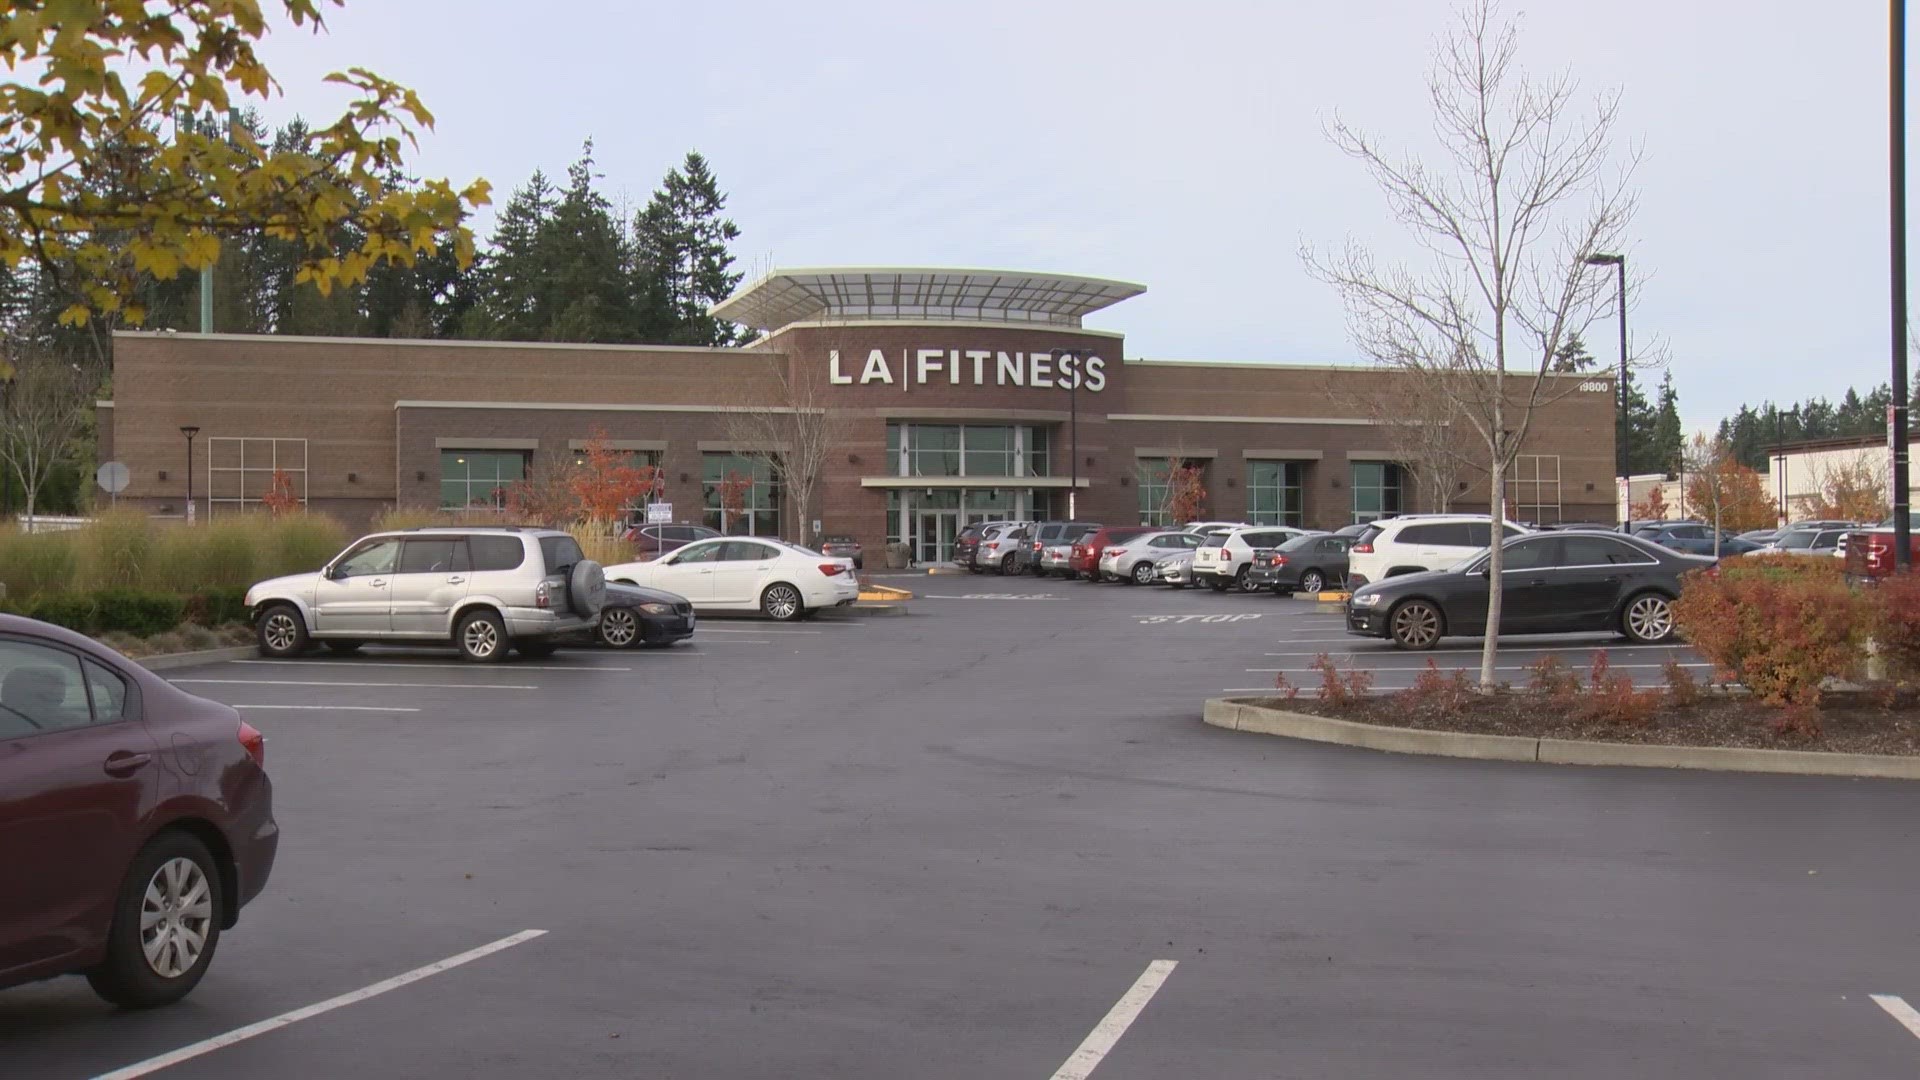 Three suspects have stolen credit cards from lockers at two gyms in the area, police say